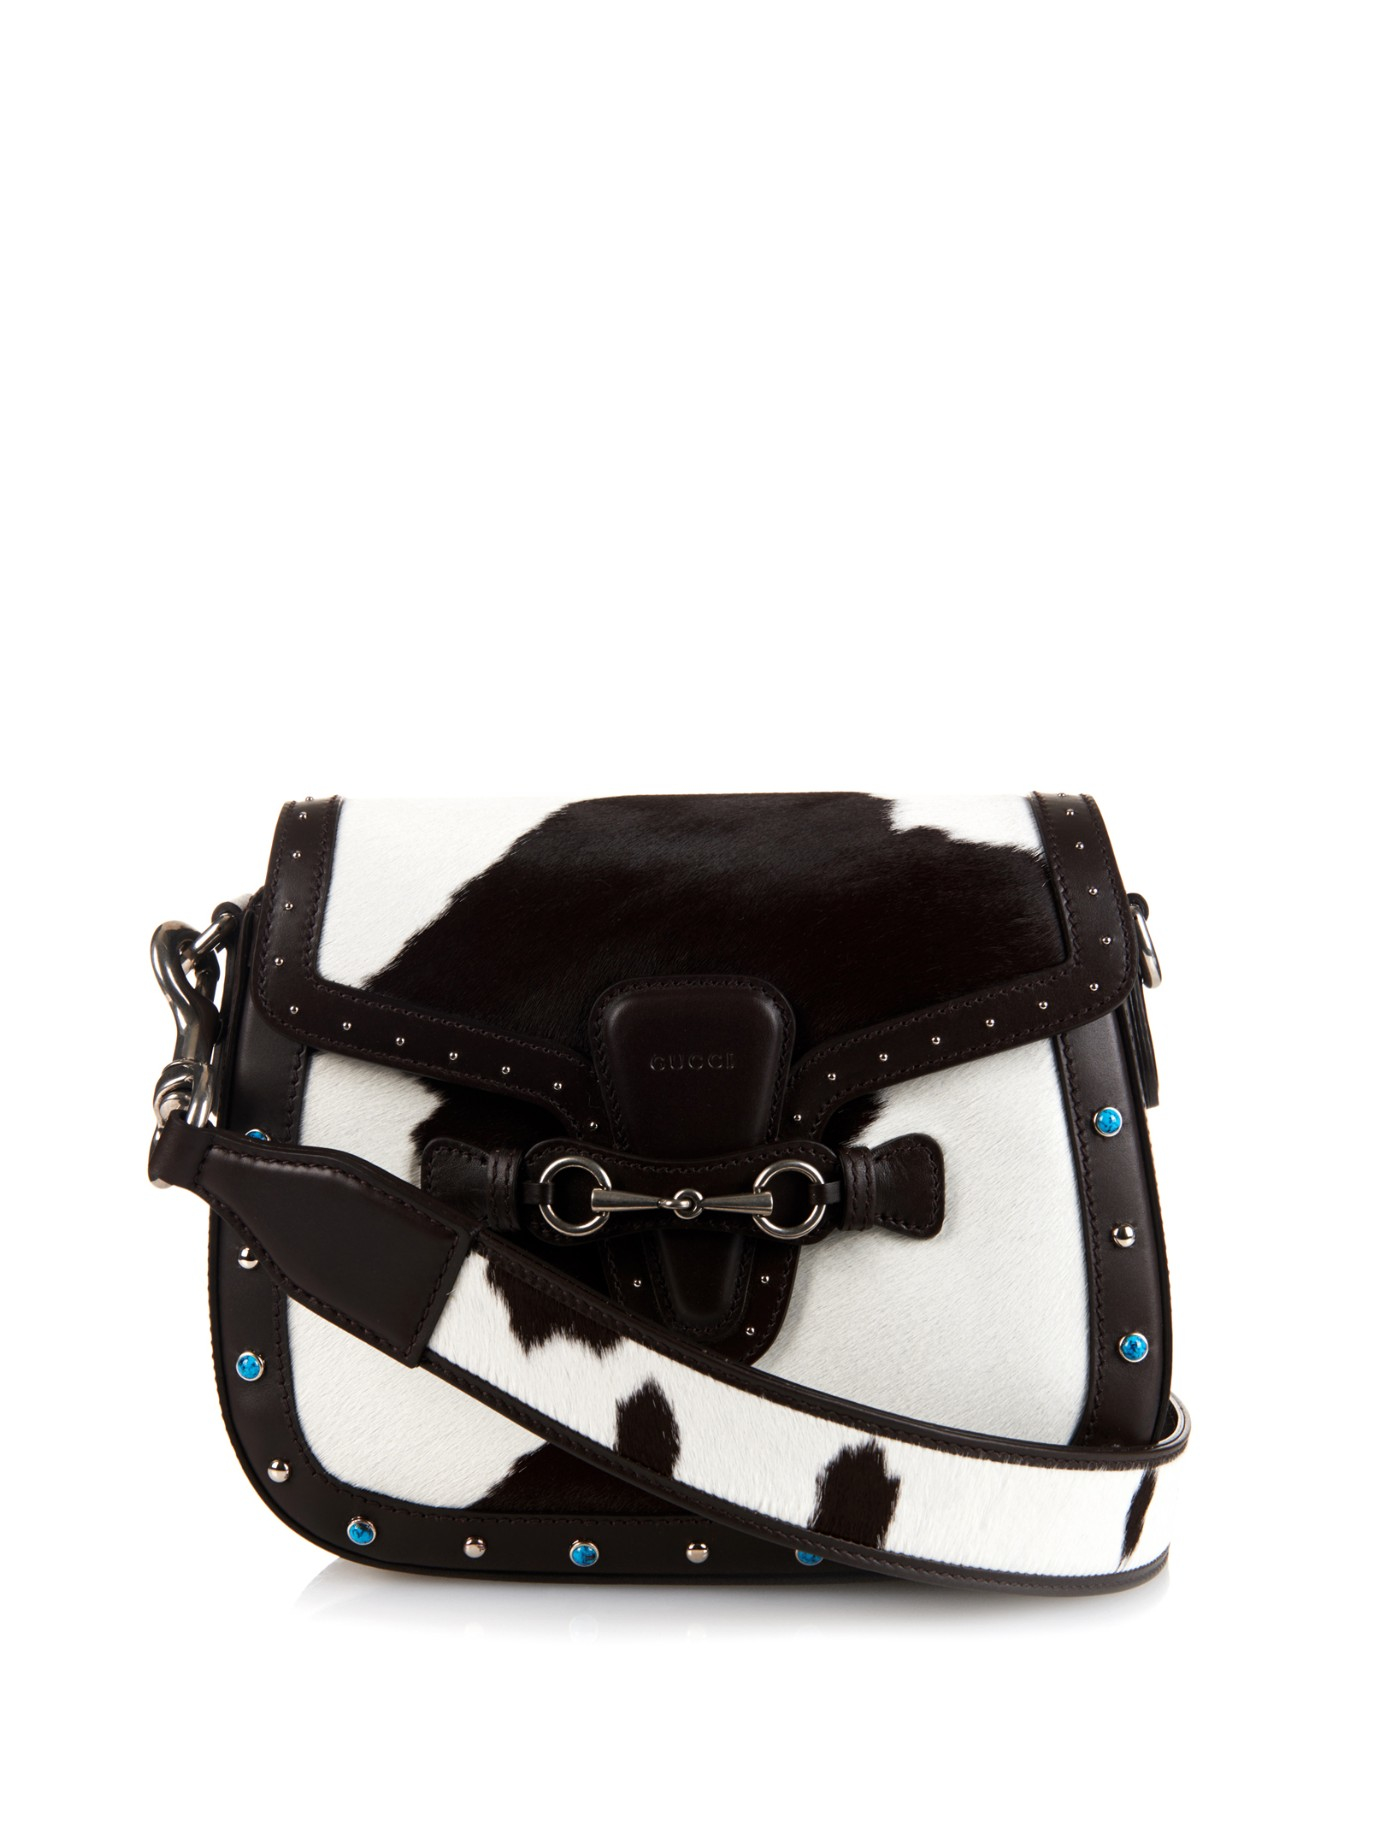 Gucci Lady Web Calf-Hair and Leather Cross-Body Bag in Black | Lyst